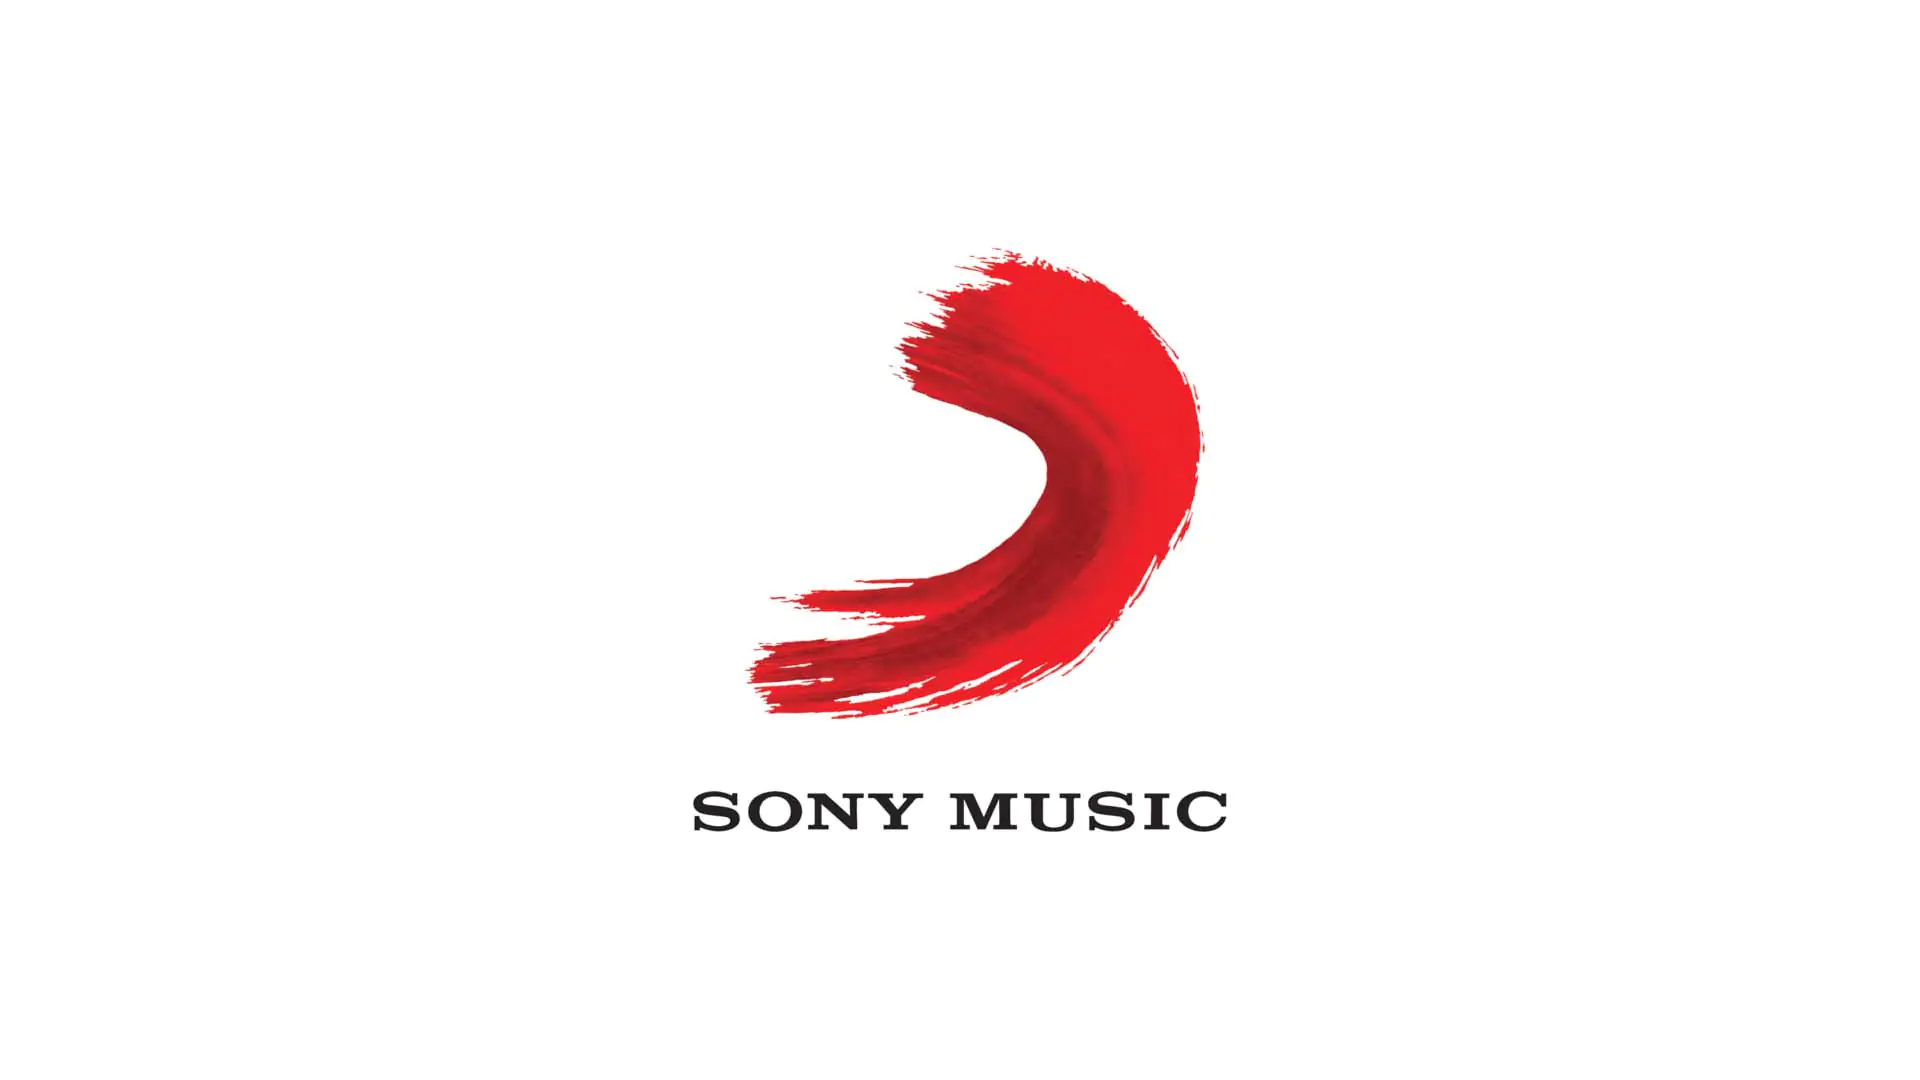 New NFT Step from Sony Music! He Has Filed A Trademark Application For That Logo!